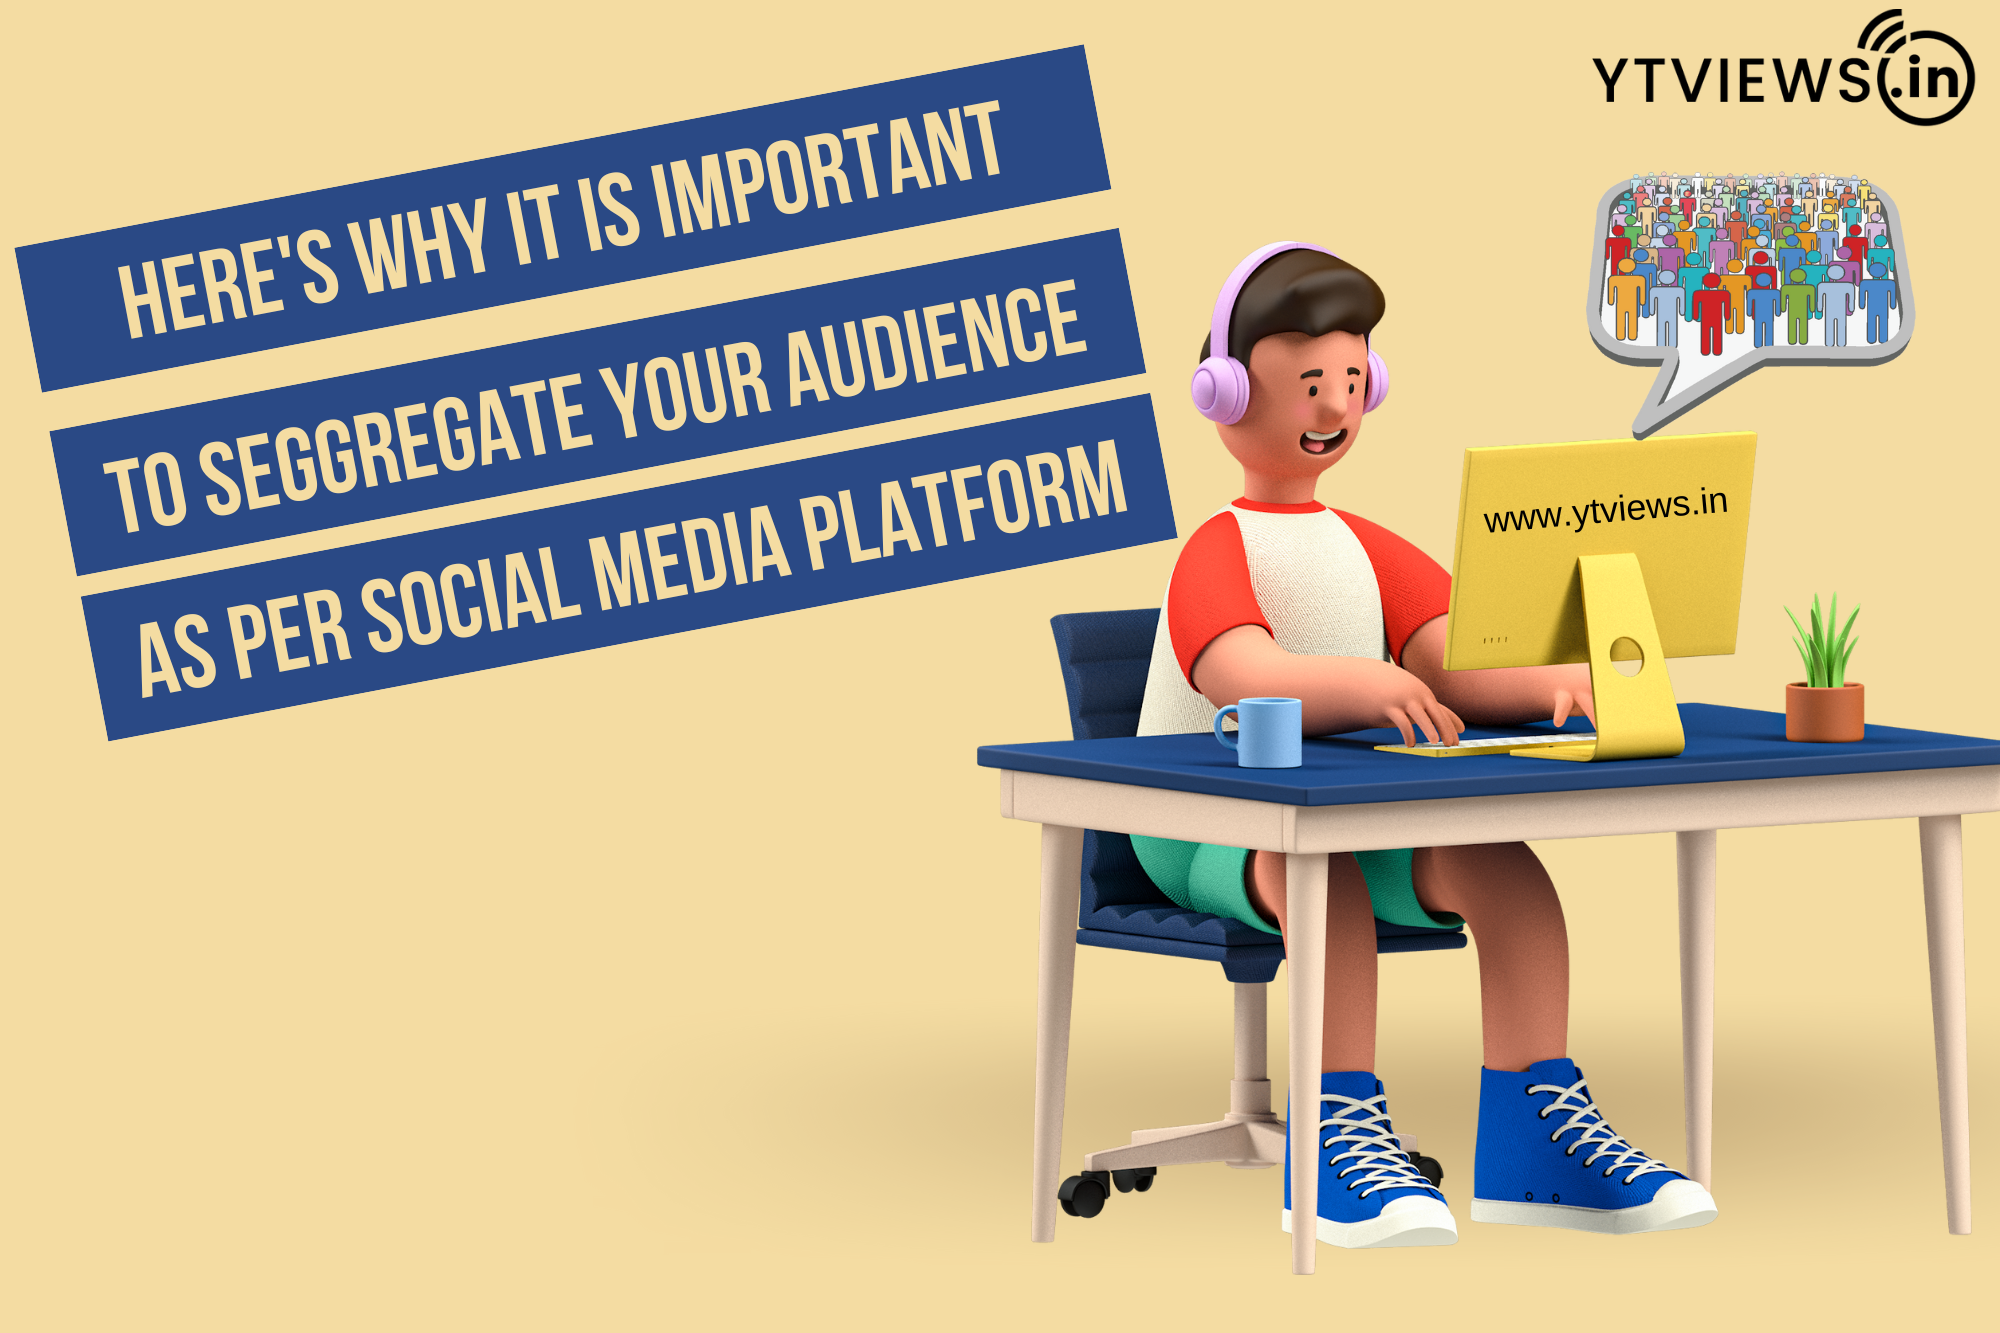 Here’s why it is important to segregate your audience as per social media platform